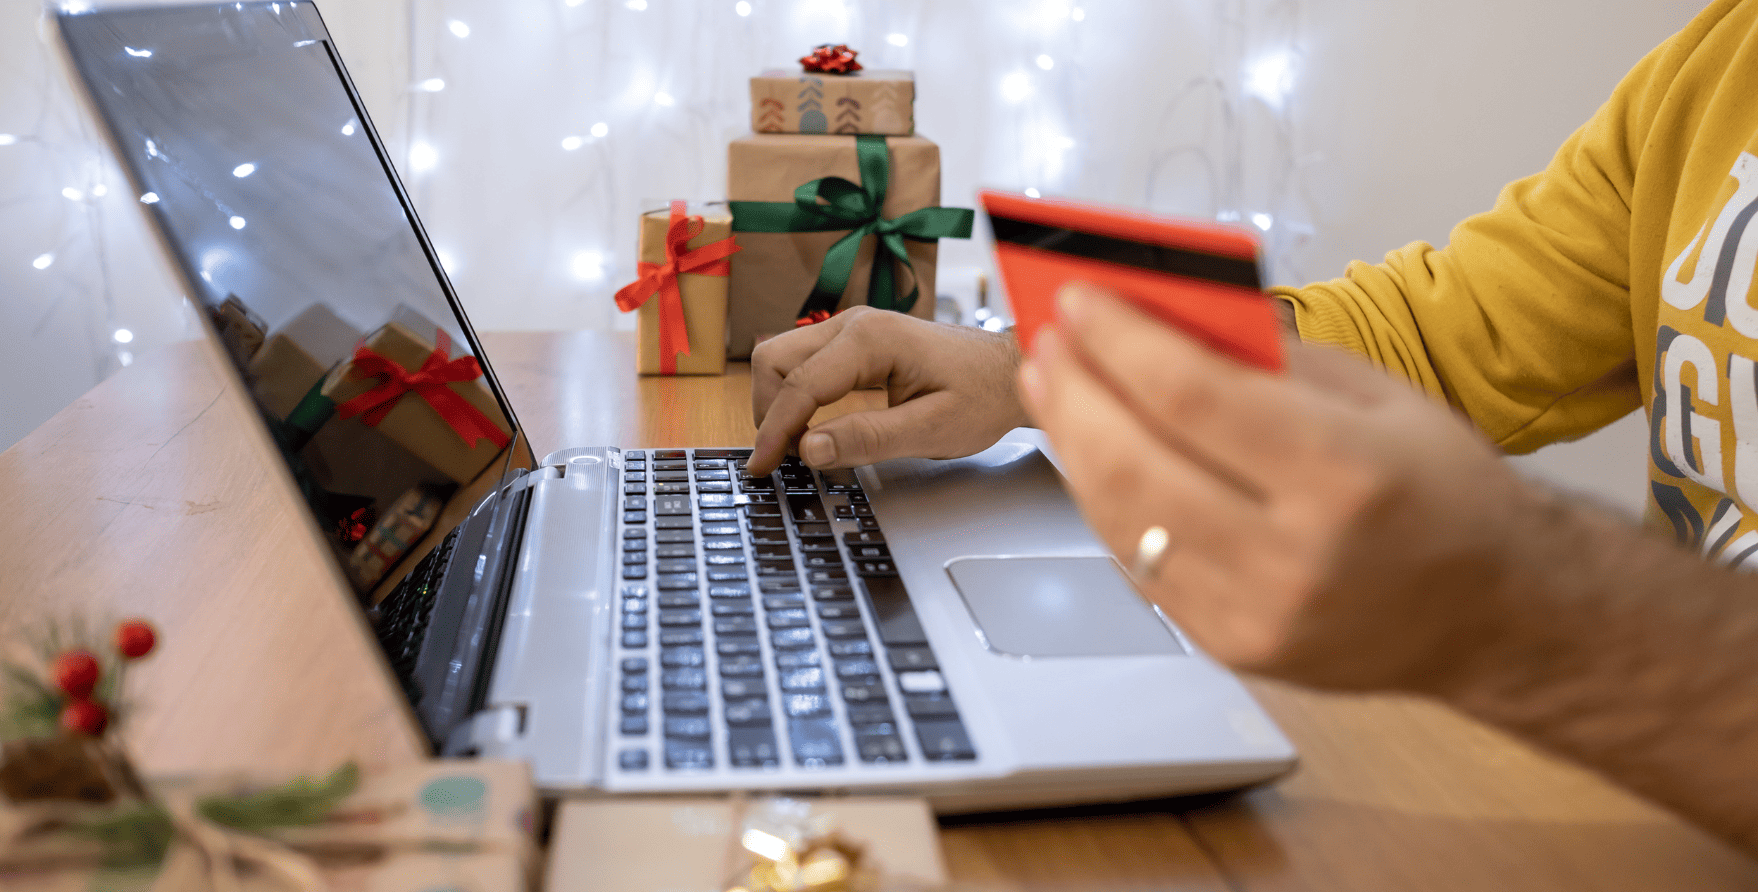 Attract Last-Minute Holiday Shoppers and Get More Sales With These Quick Tips - Organize Last-Minute Gift Guides